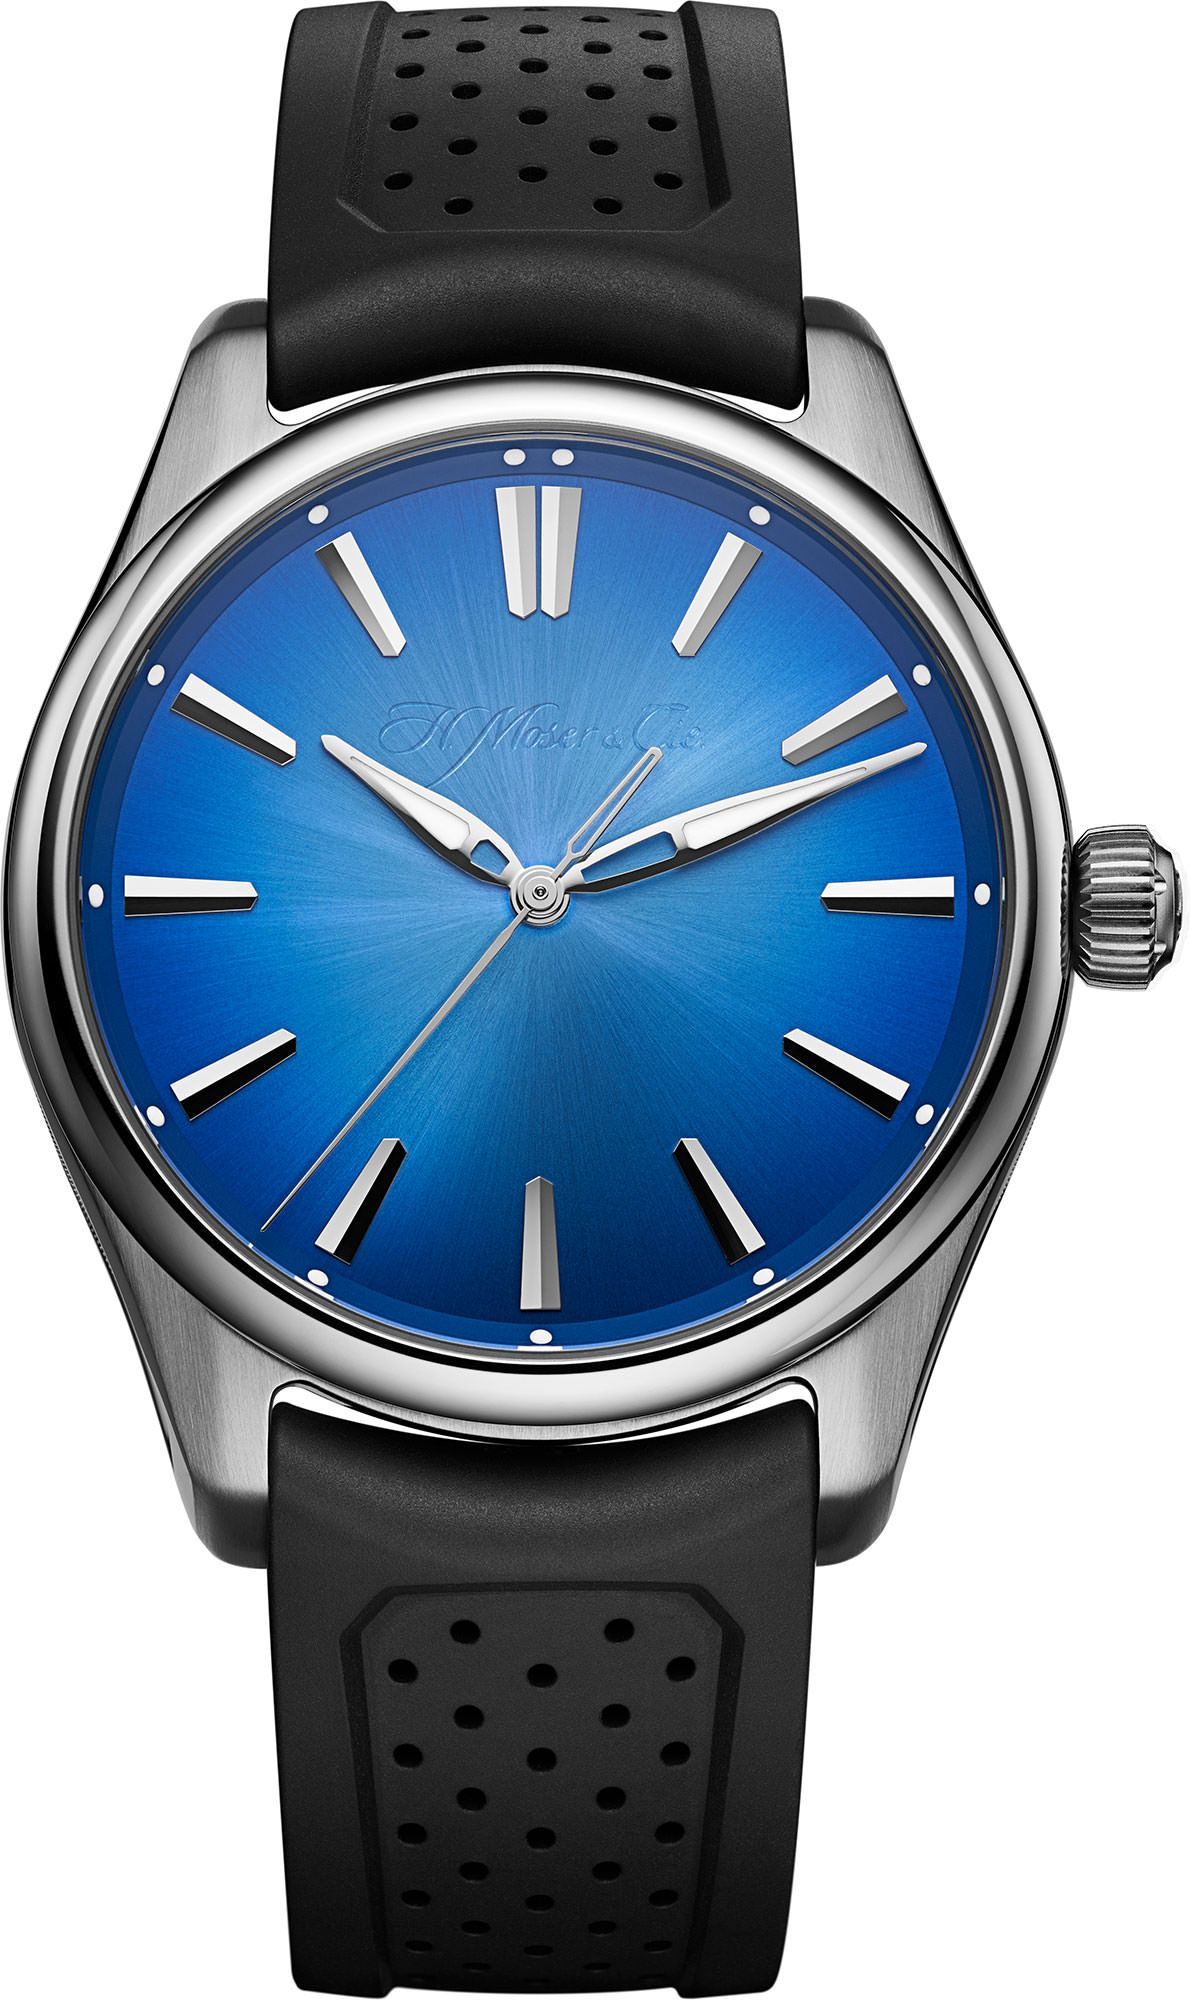 H. Moser & Cie. Centre Seconds 40 mm Watch in Blue Dial For Men - 1